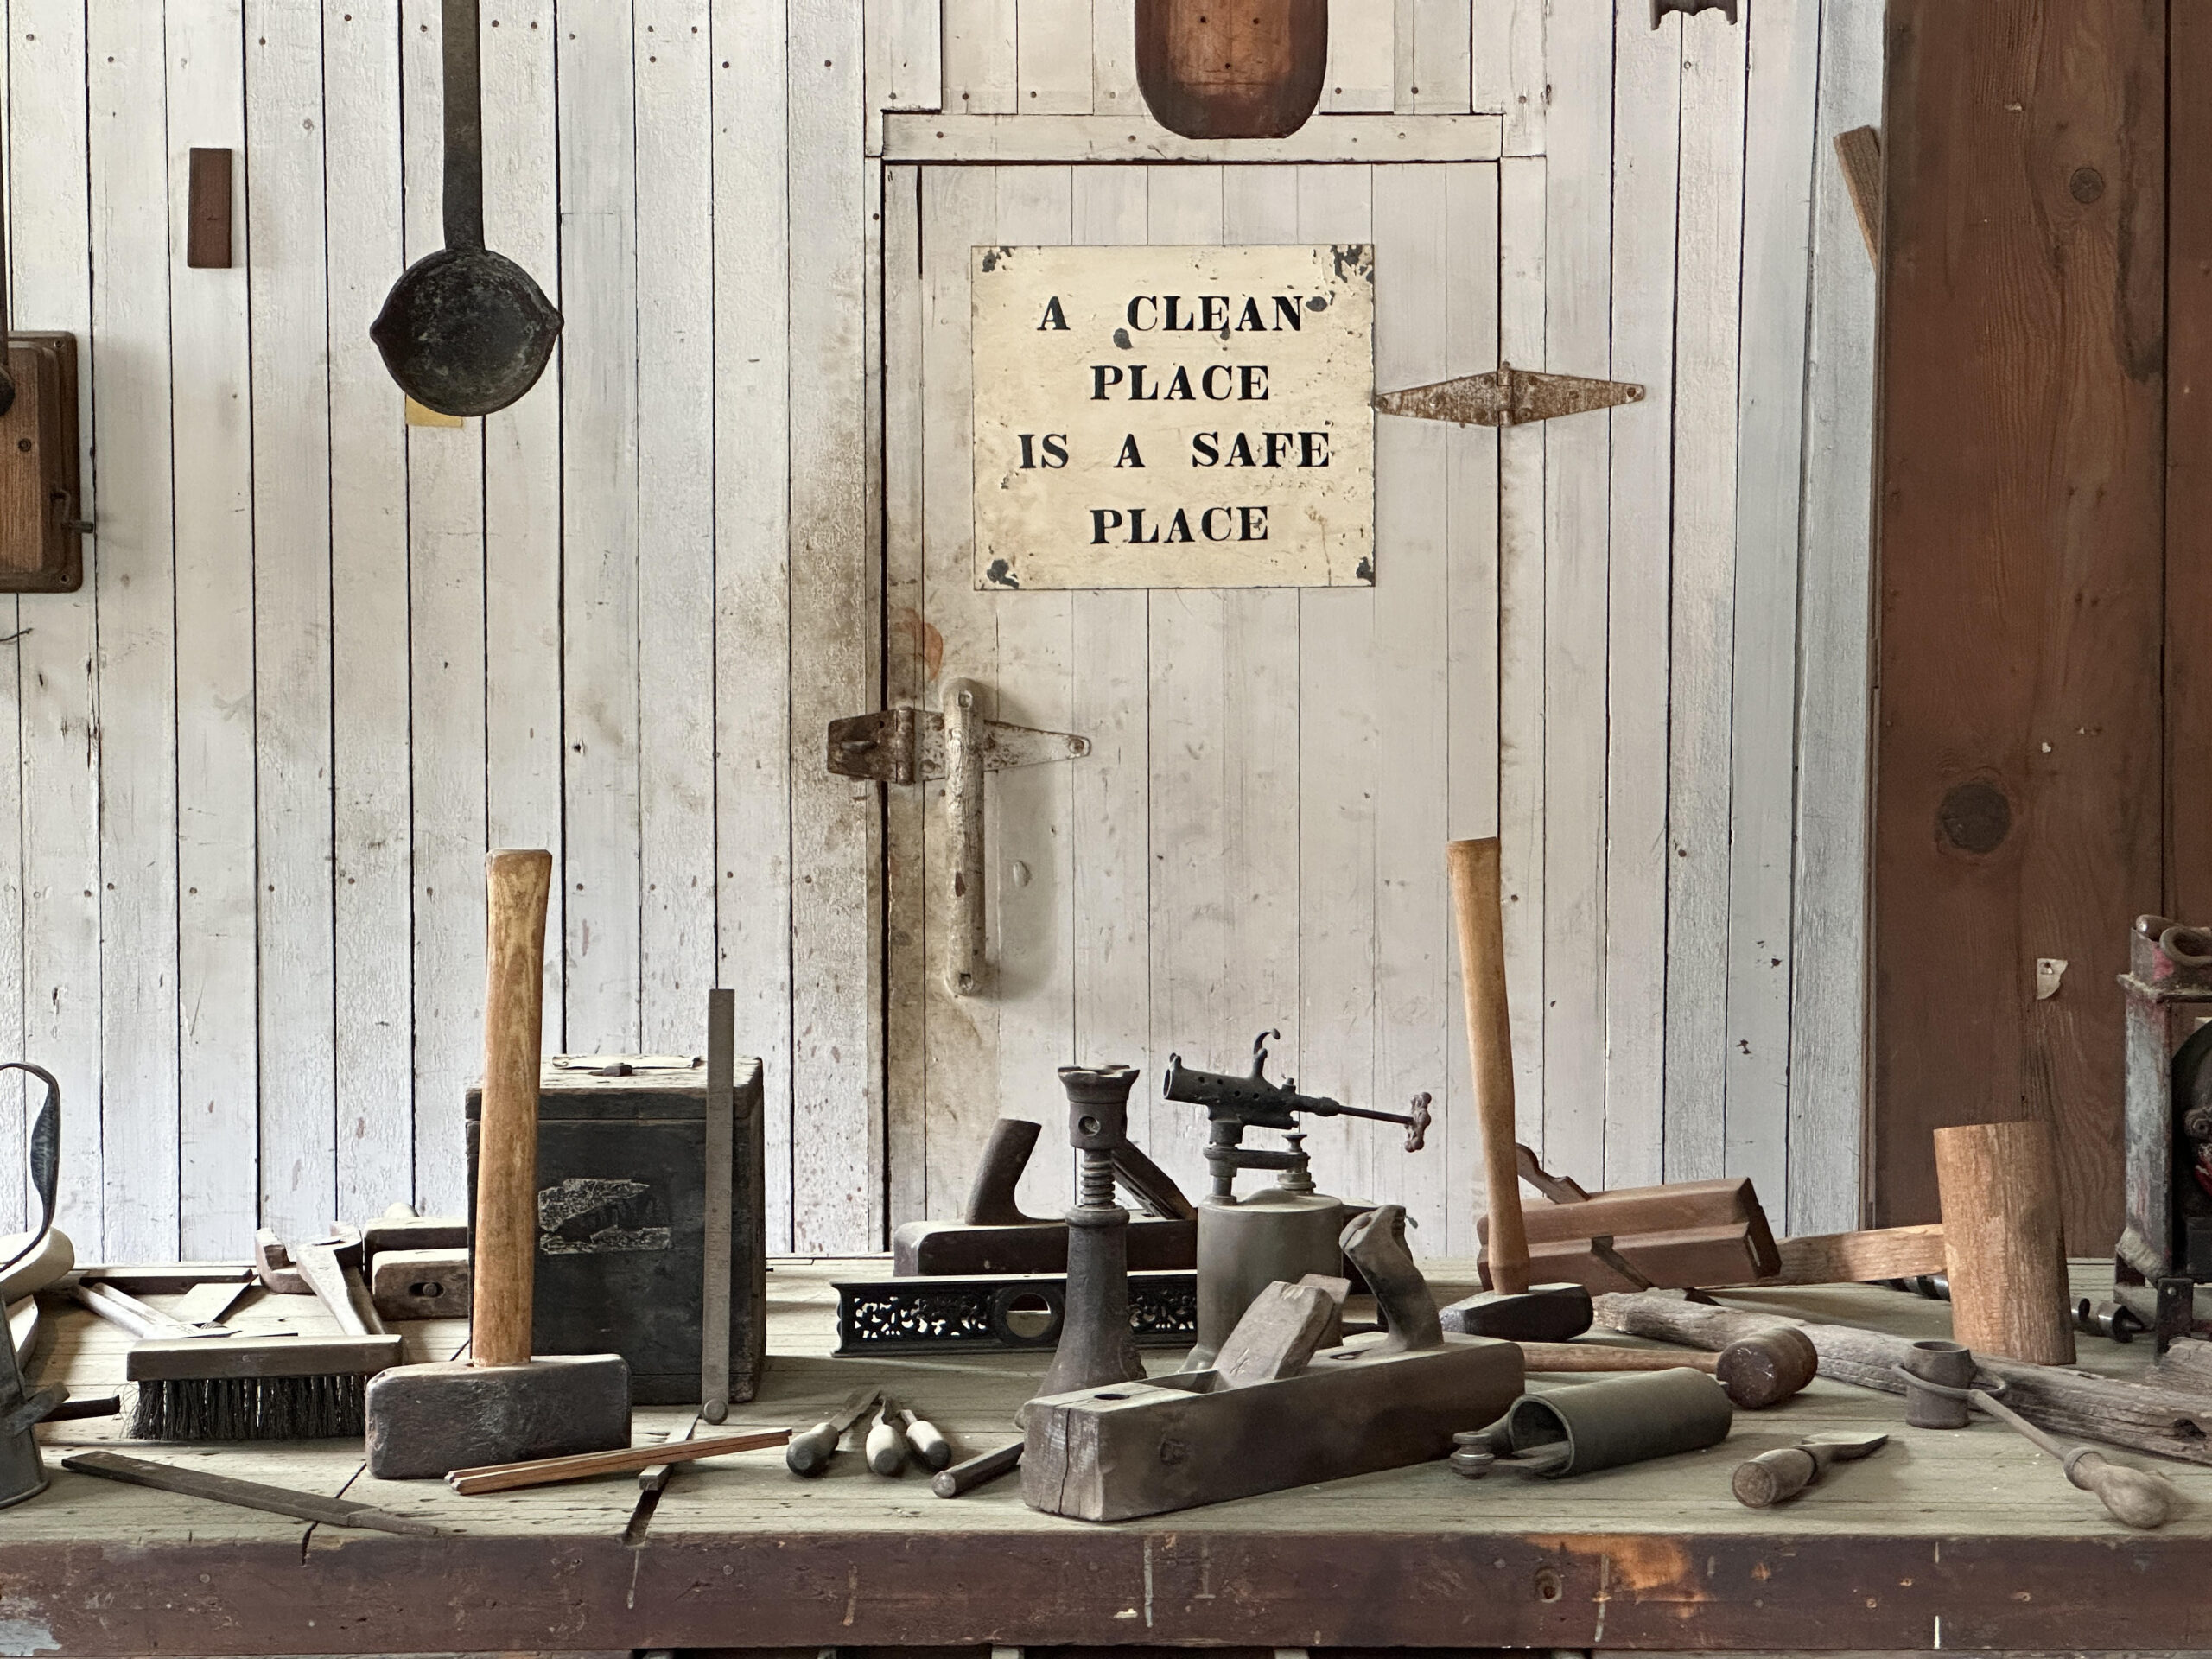 A photo of a workbench at Empire Mine State Historic Park, covered with old woodworking tools. A sign on the wall behind the workbench reads: "A Clean Place is a Safe Place."